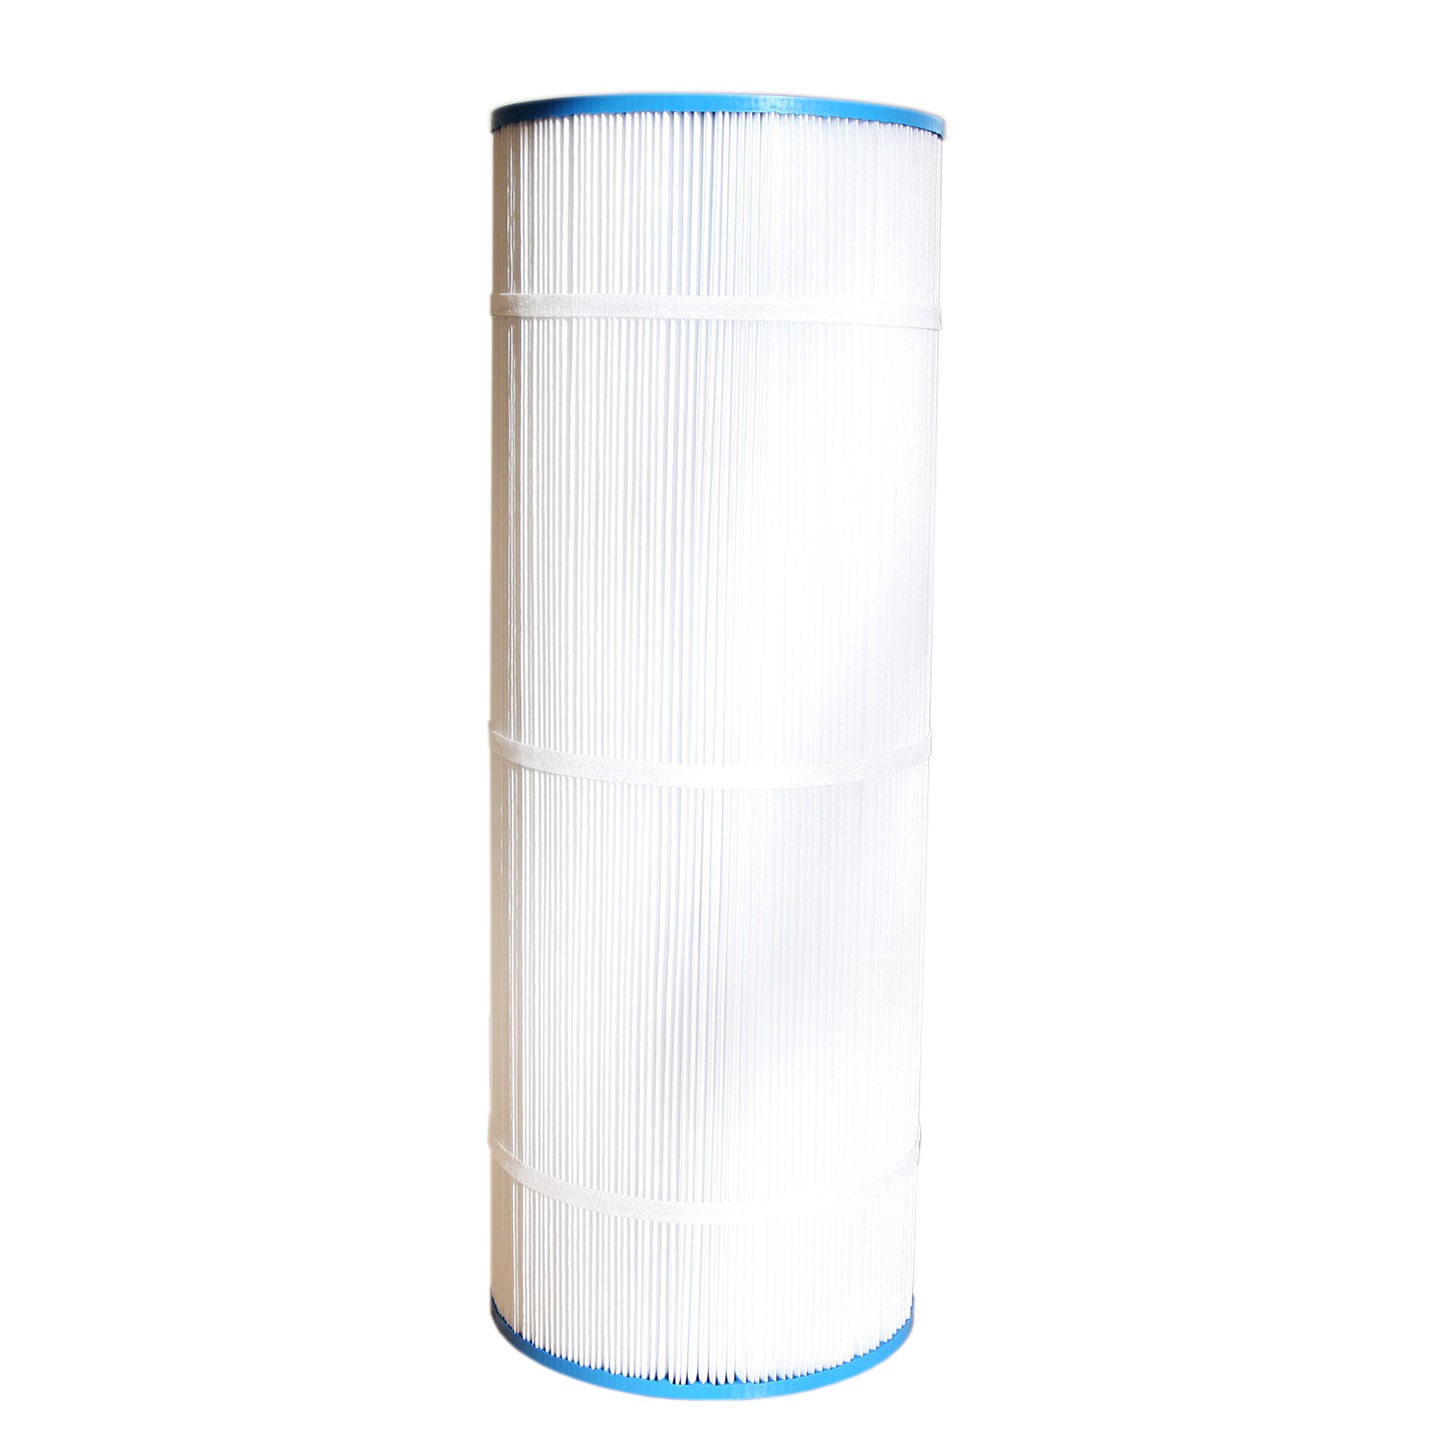 Tier1 Brand Replacement Pool and Spa Filter for Hayward CX1100-RE